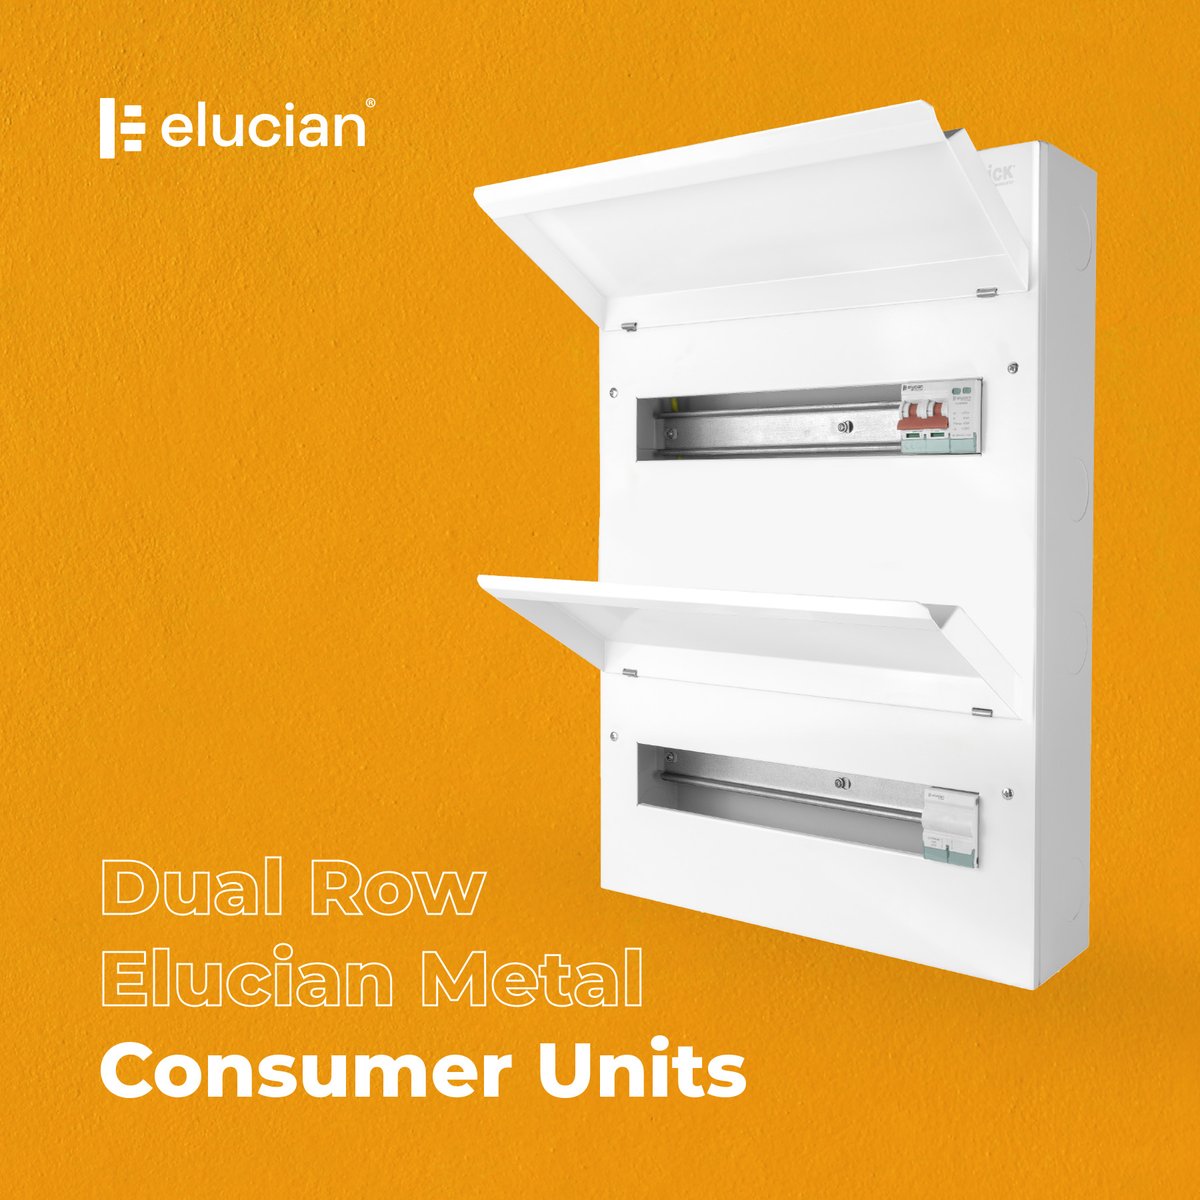 🚀 Exciting news from Click Scolmore! Introducing the new Dual Row Metal Consumer Units for larger installations. Reliable, efficient, and backed by a 10-year warranty. Upgrade your electrical game today! ⚡ scolmore.com/article/new-el… #ClickScolmore #Elucian #ElectricalSafety